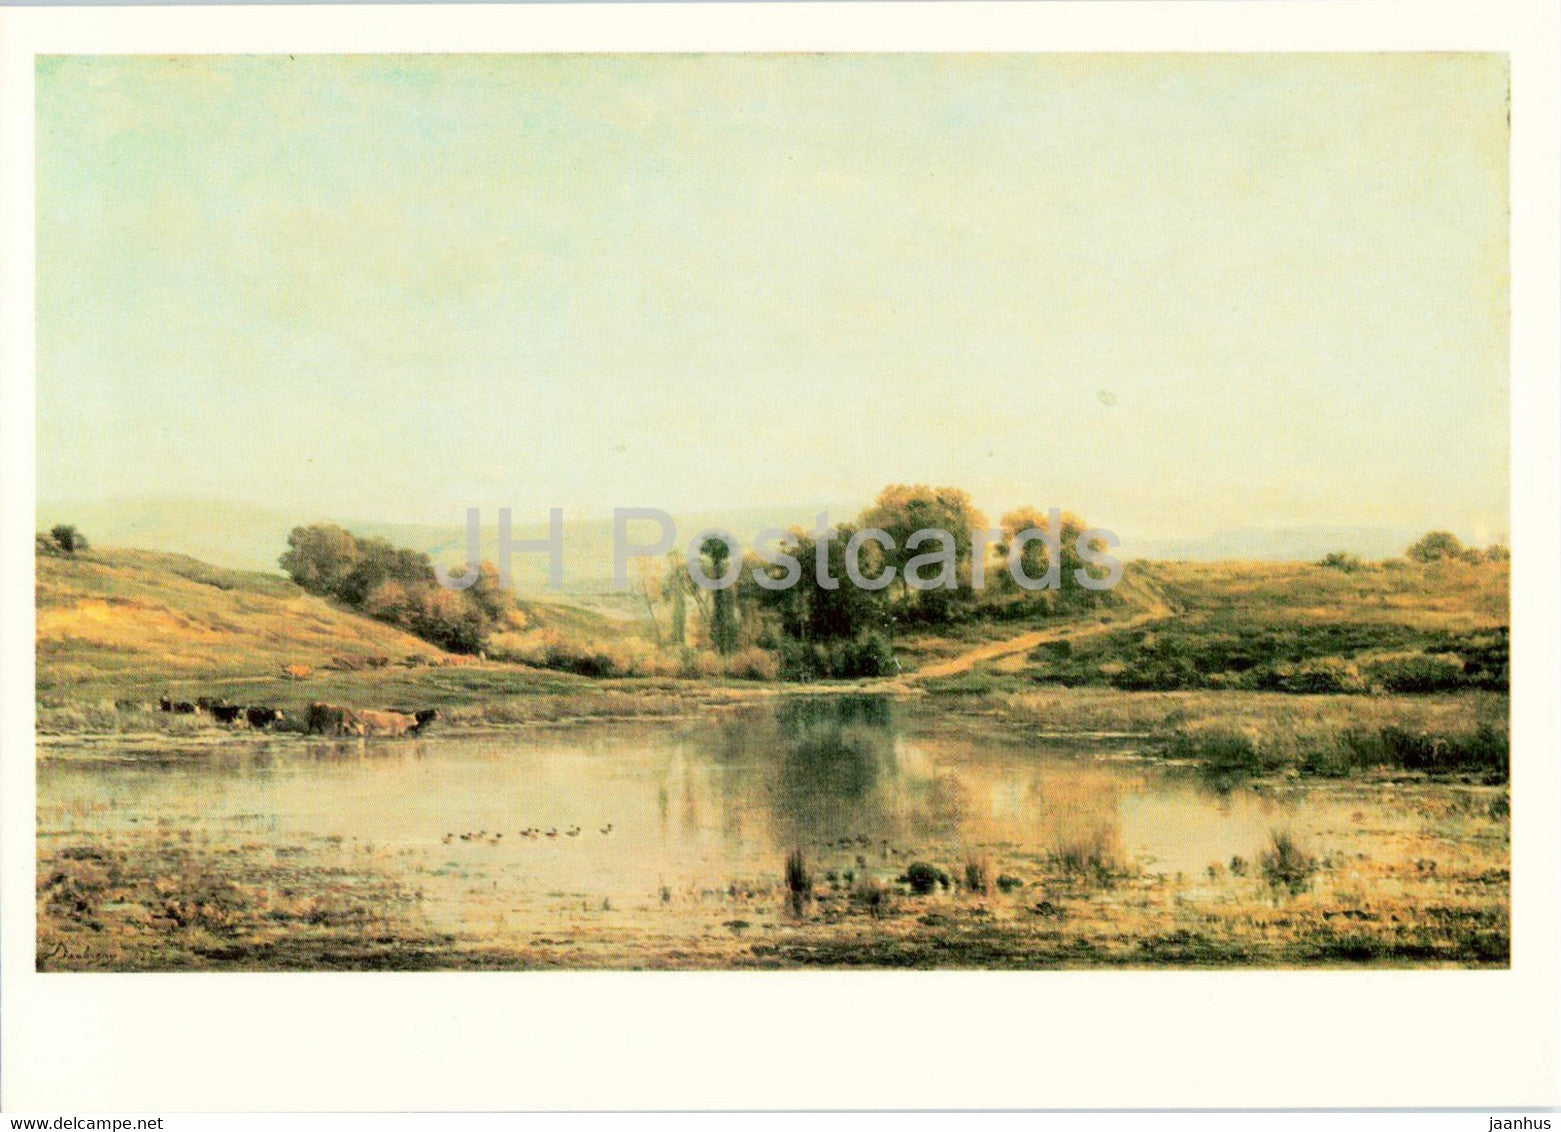 painting by Charles-Francois Daubigny - The Pond - French art - 1983 - Russia USSR - unused - JH Postcards